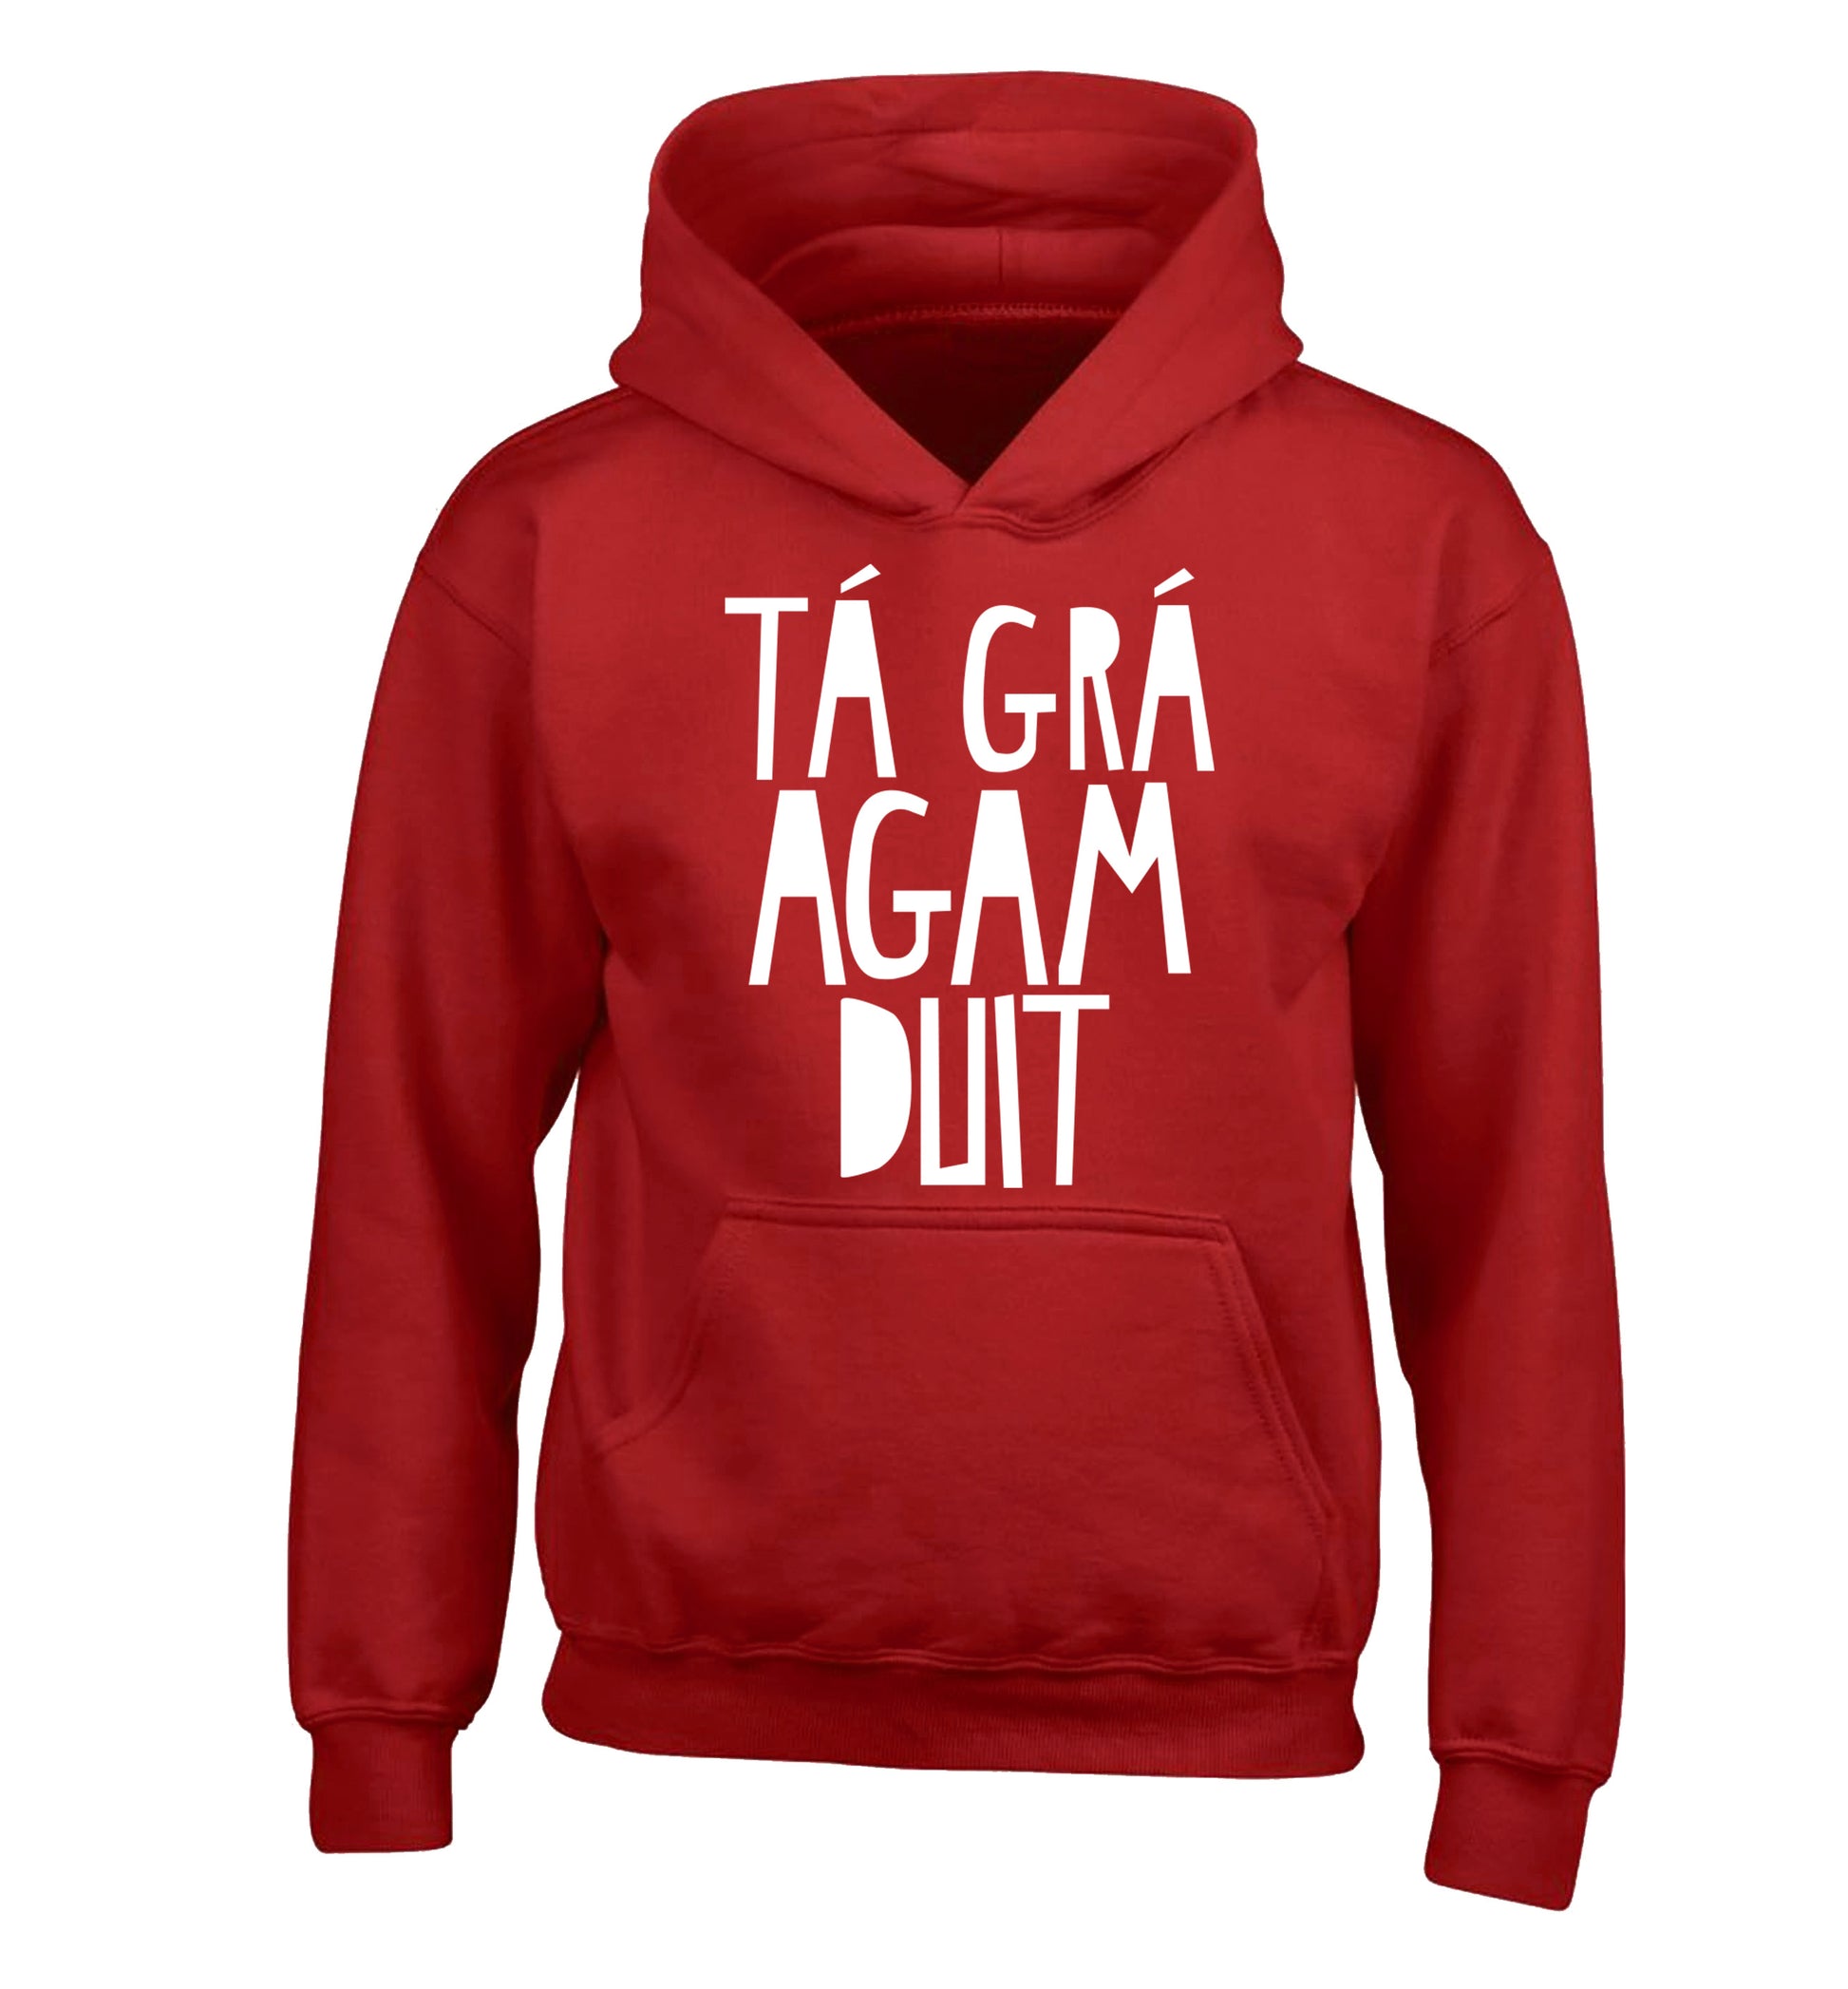 T‚Ä° gr‚Ä° agam duit - I love you children's red hoodie 12-13 Years